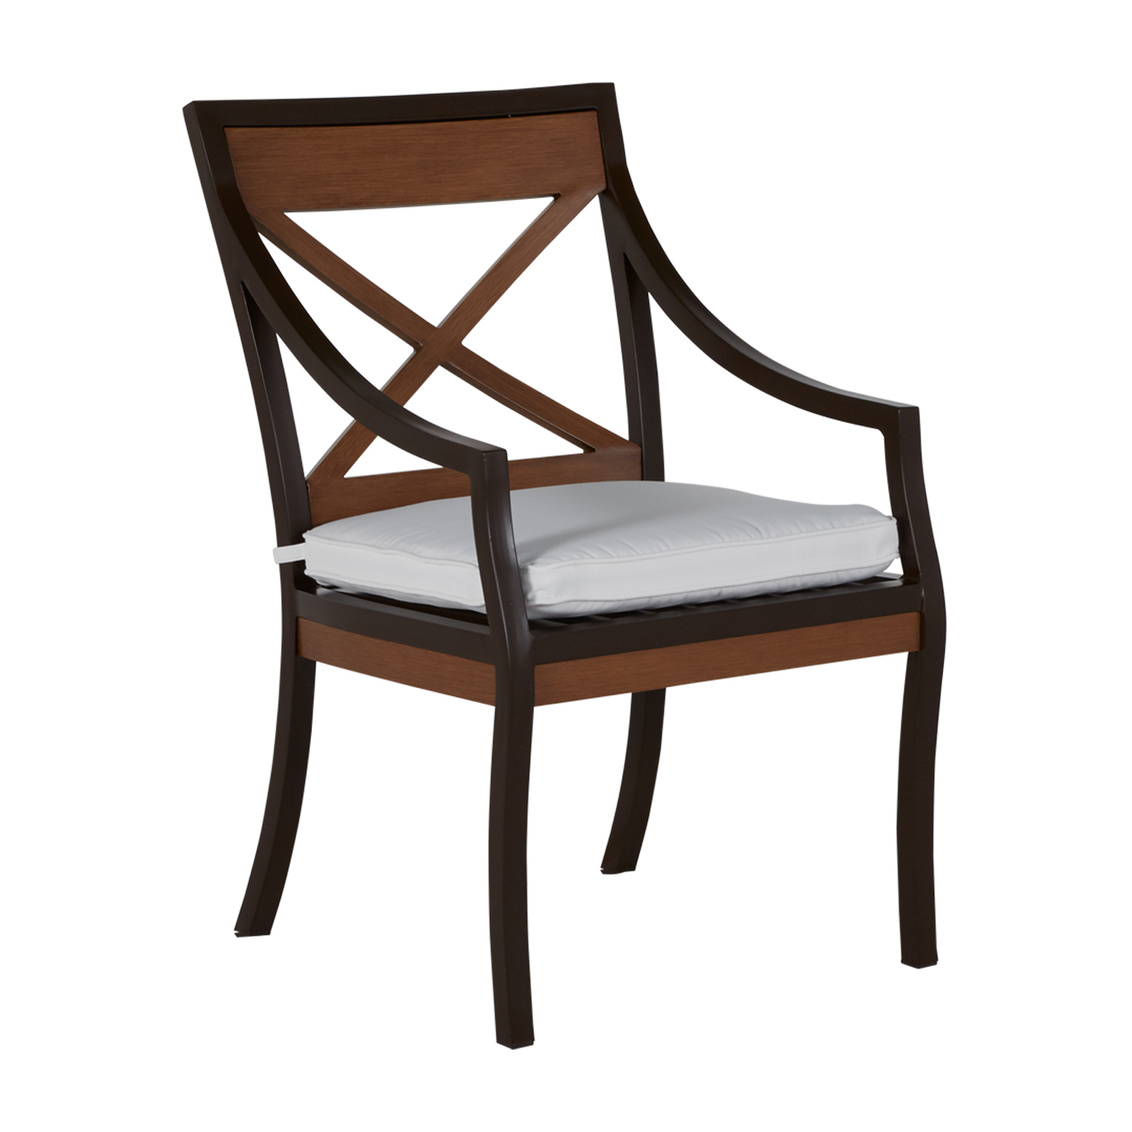 belize arm chair in mahogany – frame only product image